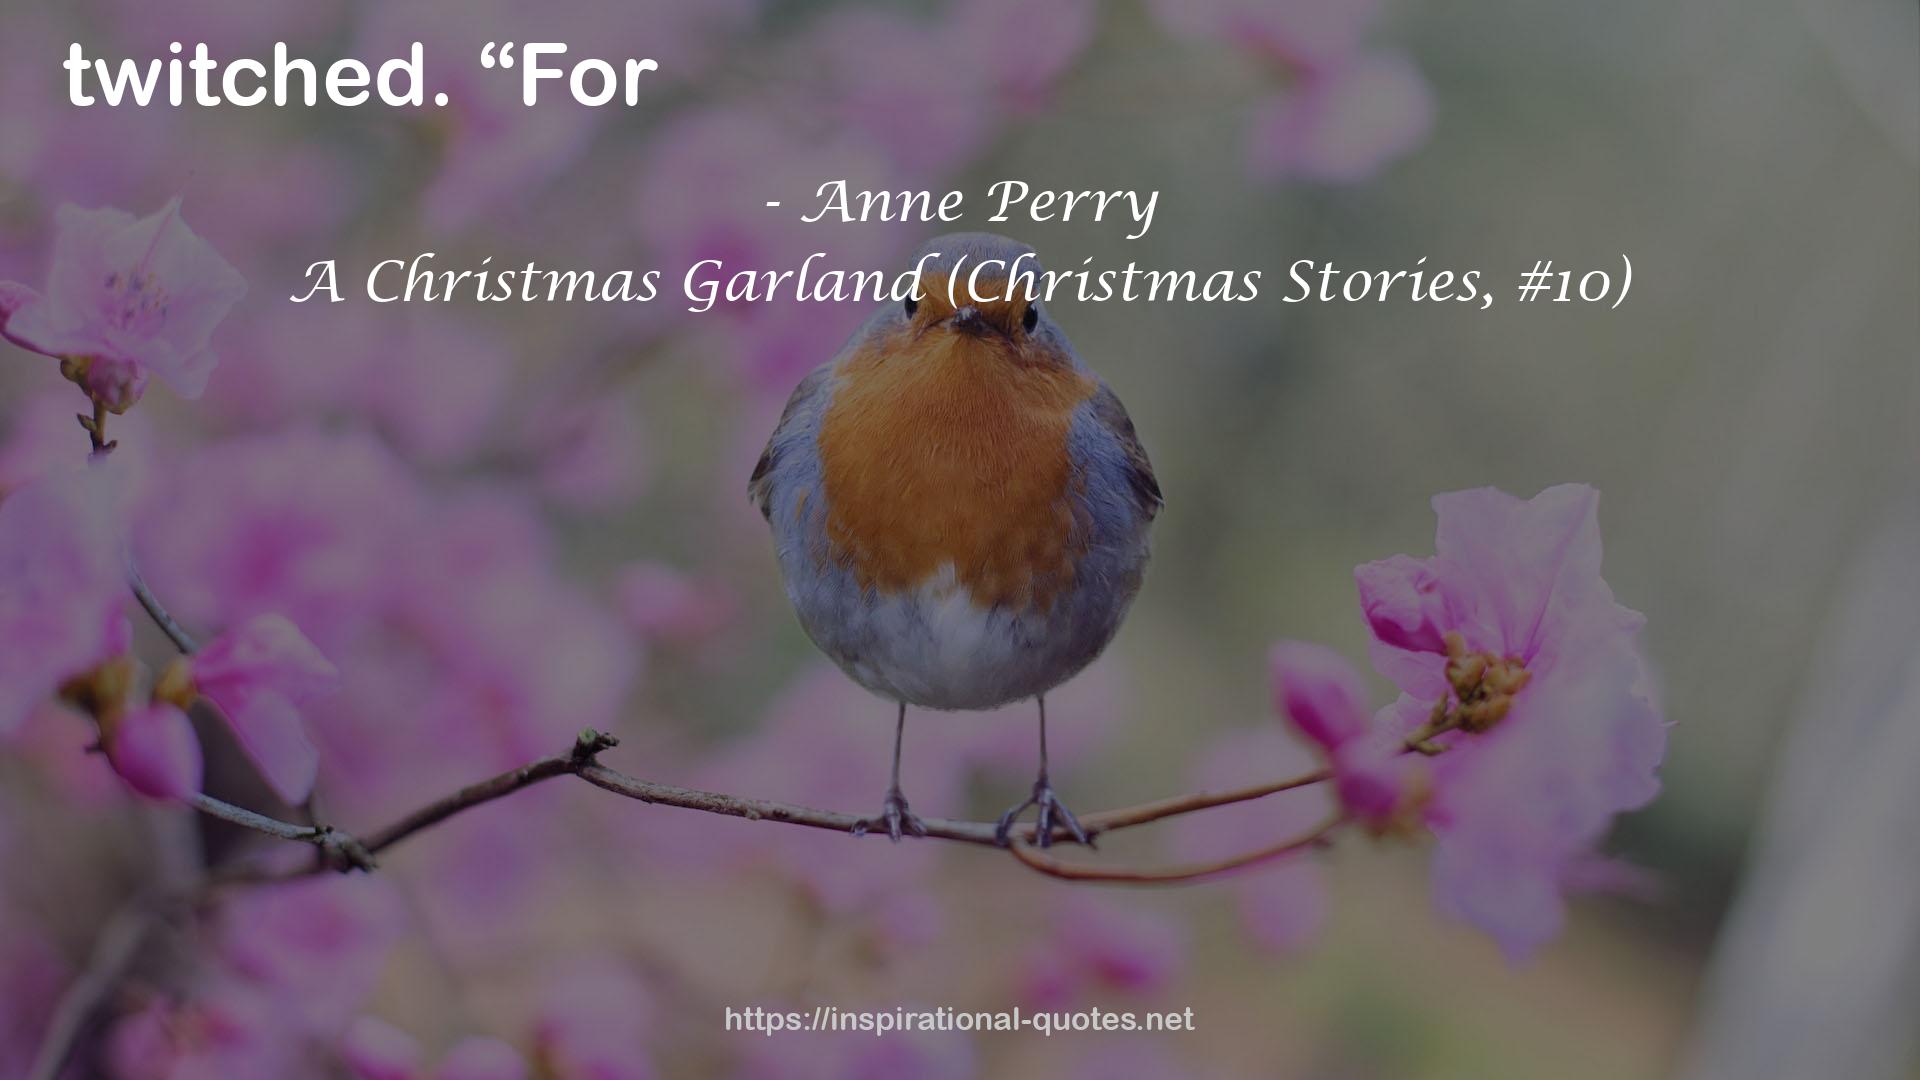 A Christmas Garland (Christmas Stories, #10) QUOTES